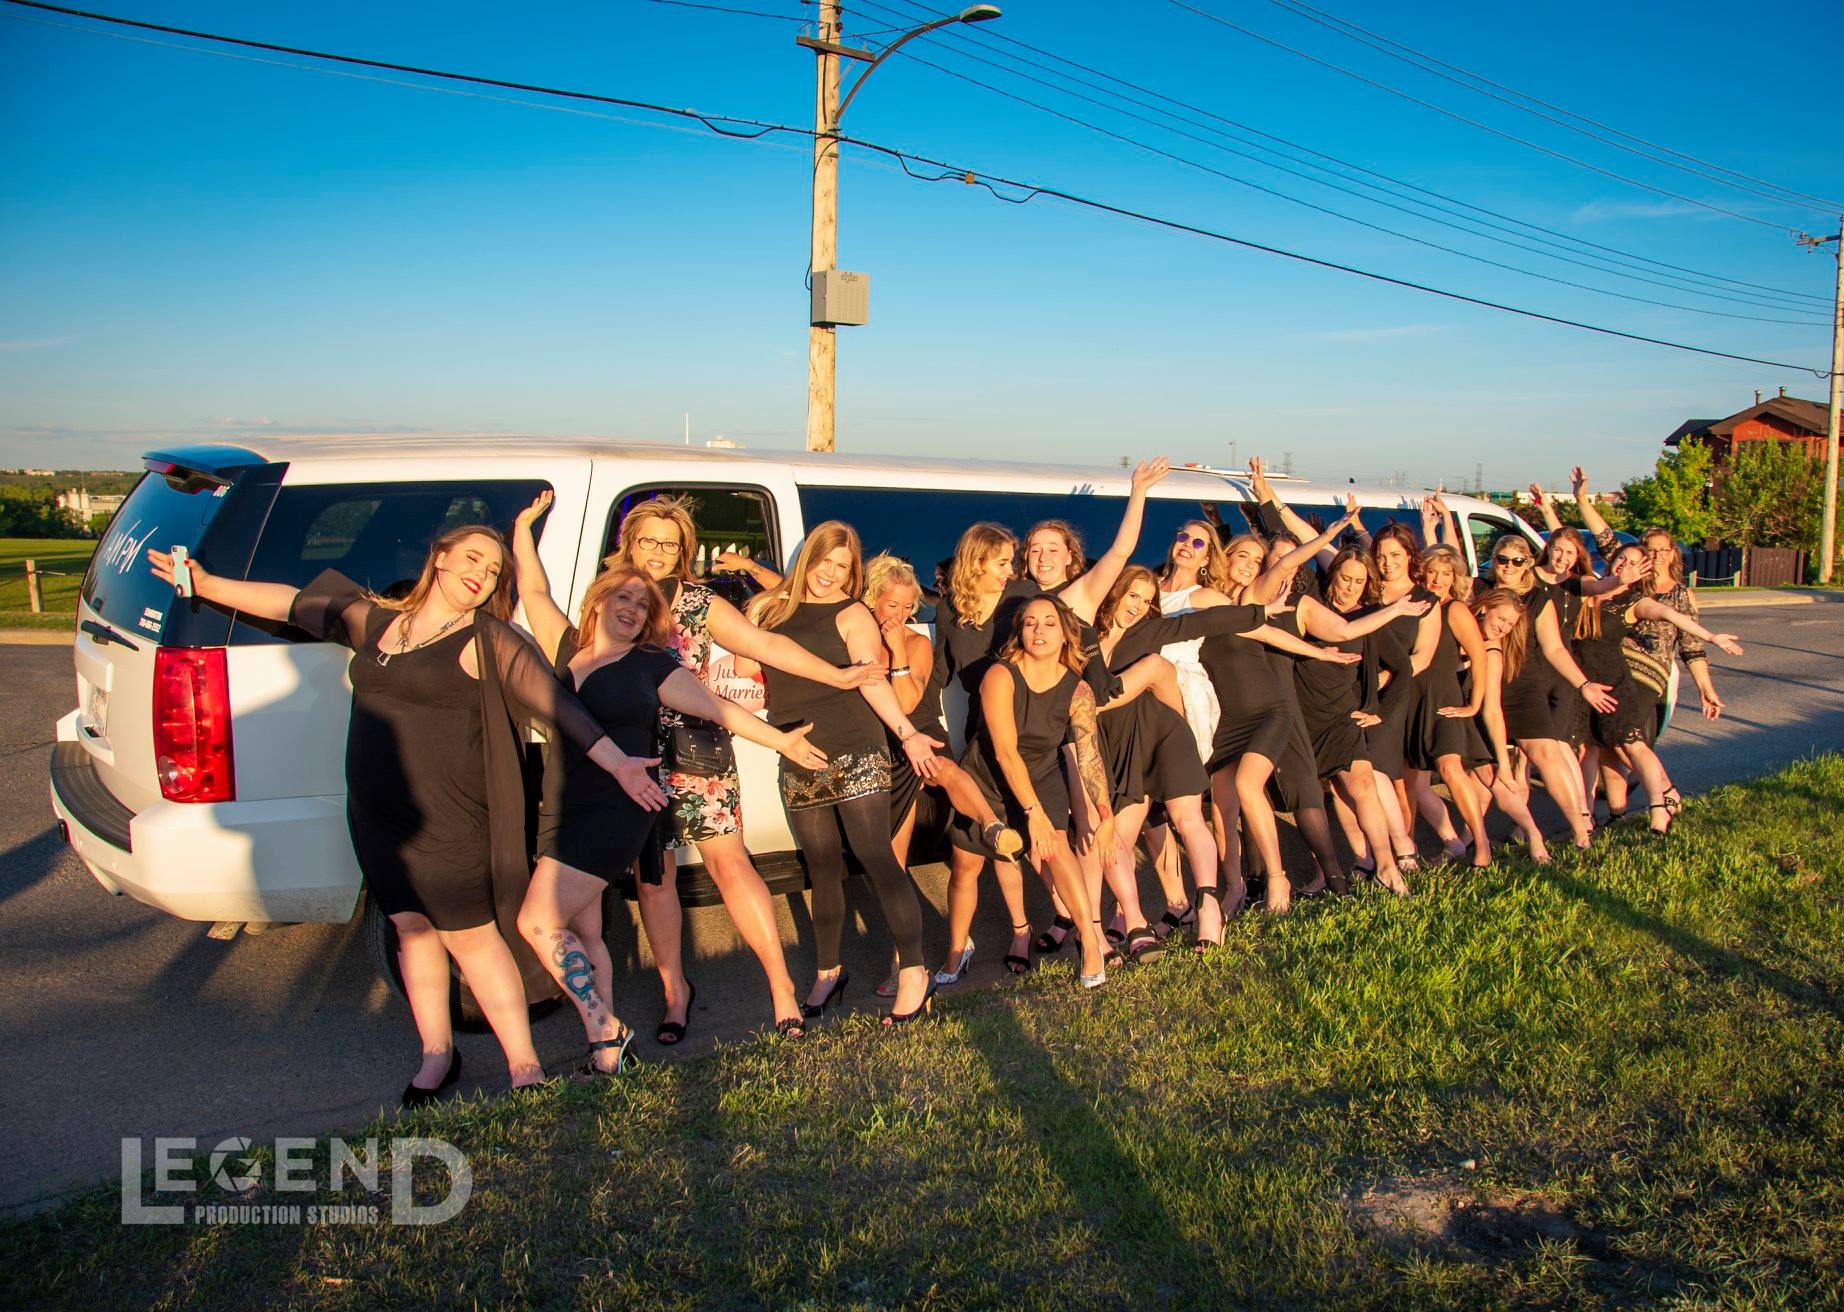 Group of ladies in black dresses posing in front of a WhiteSuburban Limo